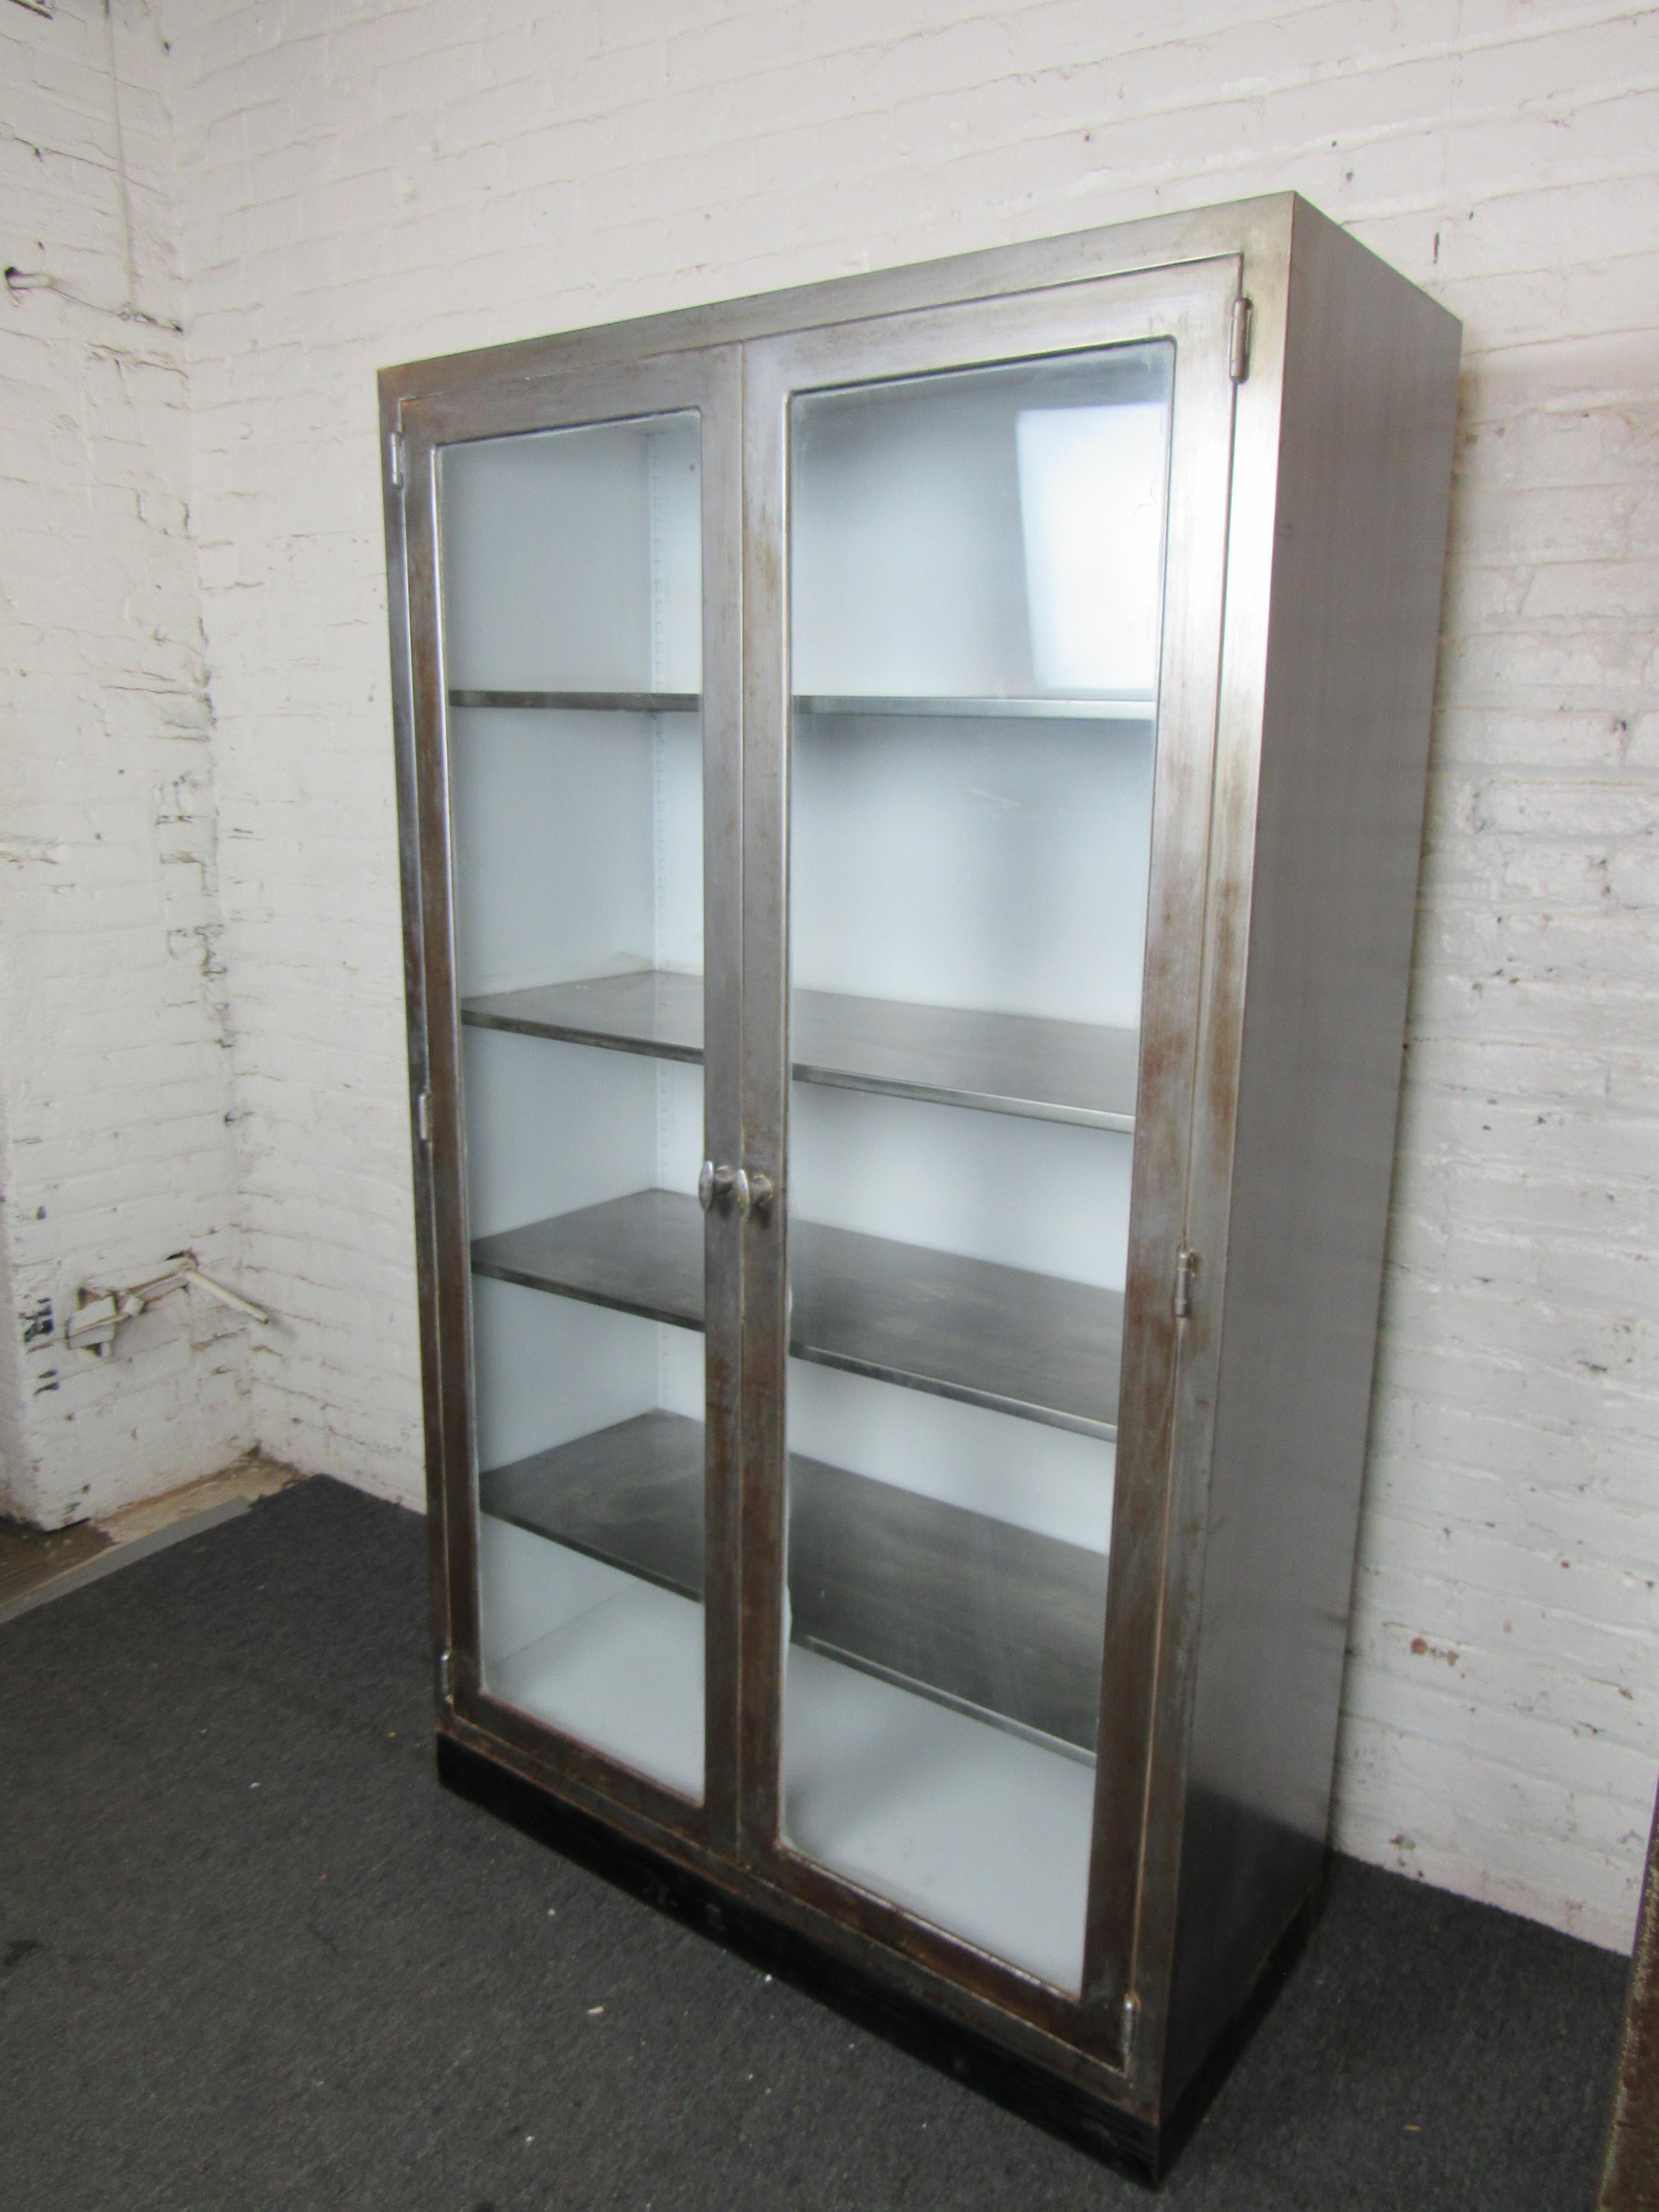 Striking industrial metal factory cabinet that has been restored with a bare metal design. Can be used as a display cabinet or for storage now. Has adjustable platforms. Glass doors with working handles. 
(Please confirm item location - NY or NJ -